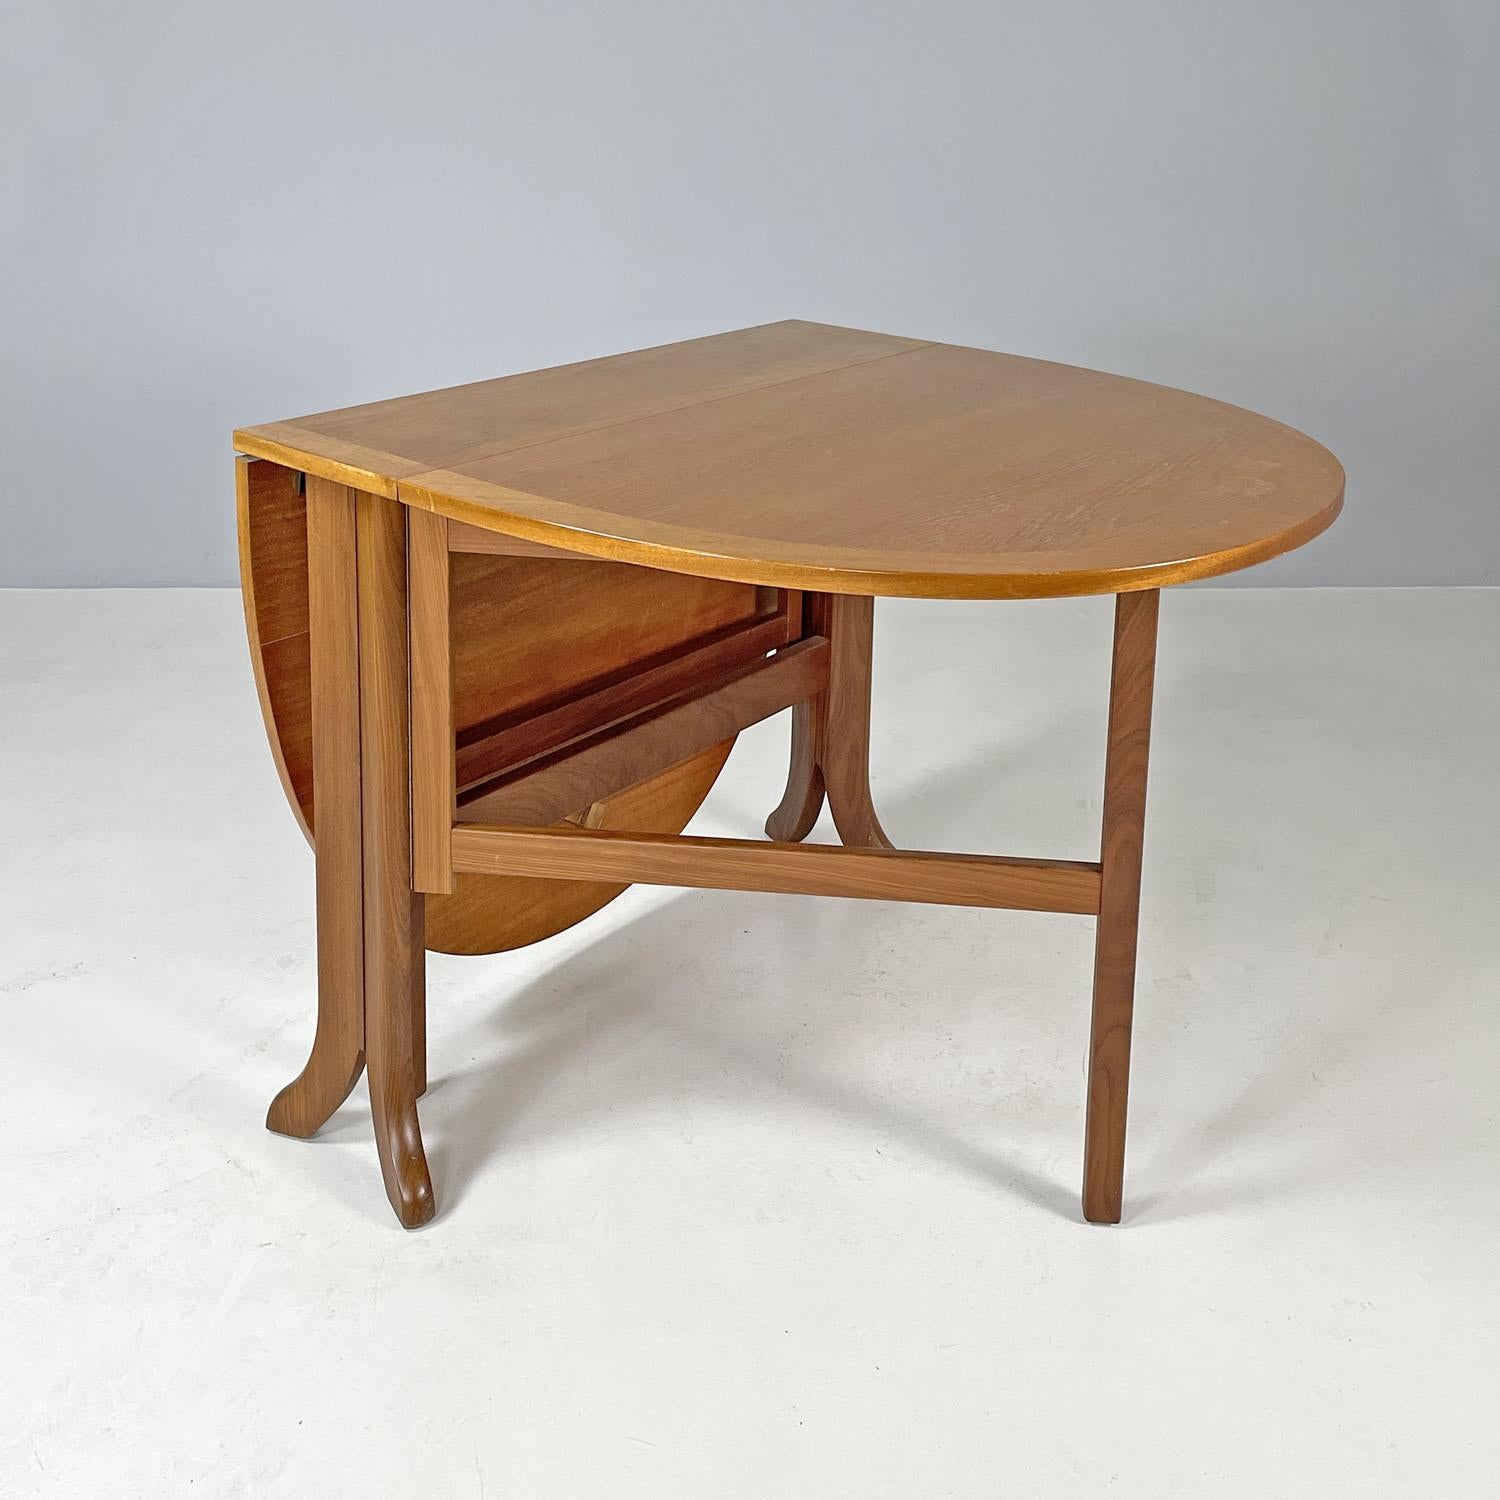 Wood English mid-century modern wooden dining table with flap doors, 1960s For Sale